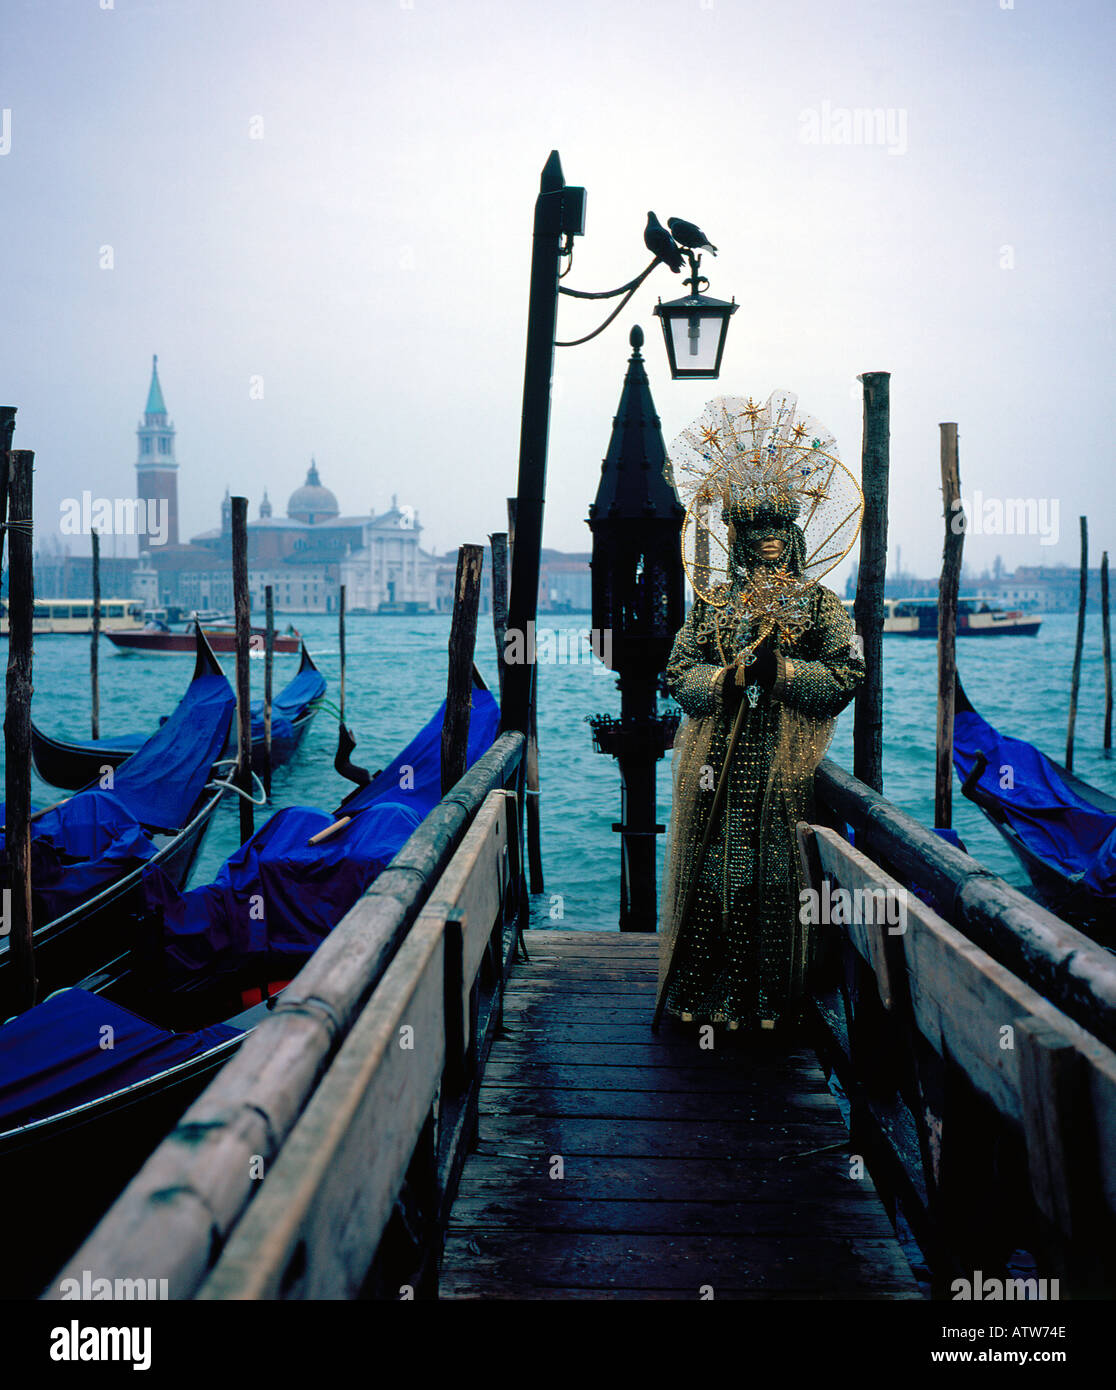 Venice Carnival Italy, UNESCO World Heritage Site, Europe. Photo by Willy Matheisl Stock Photo